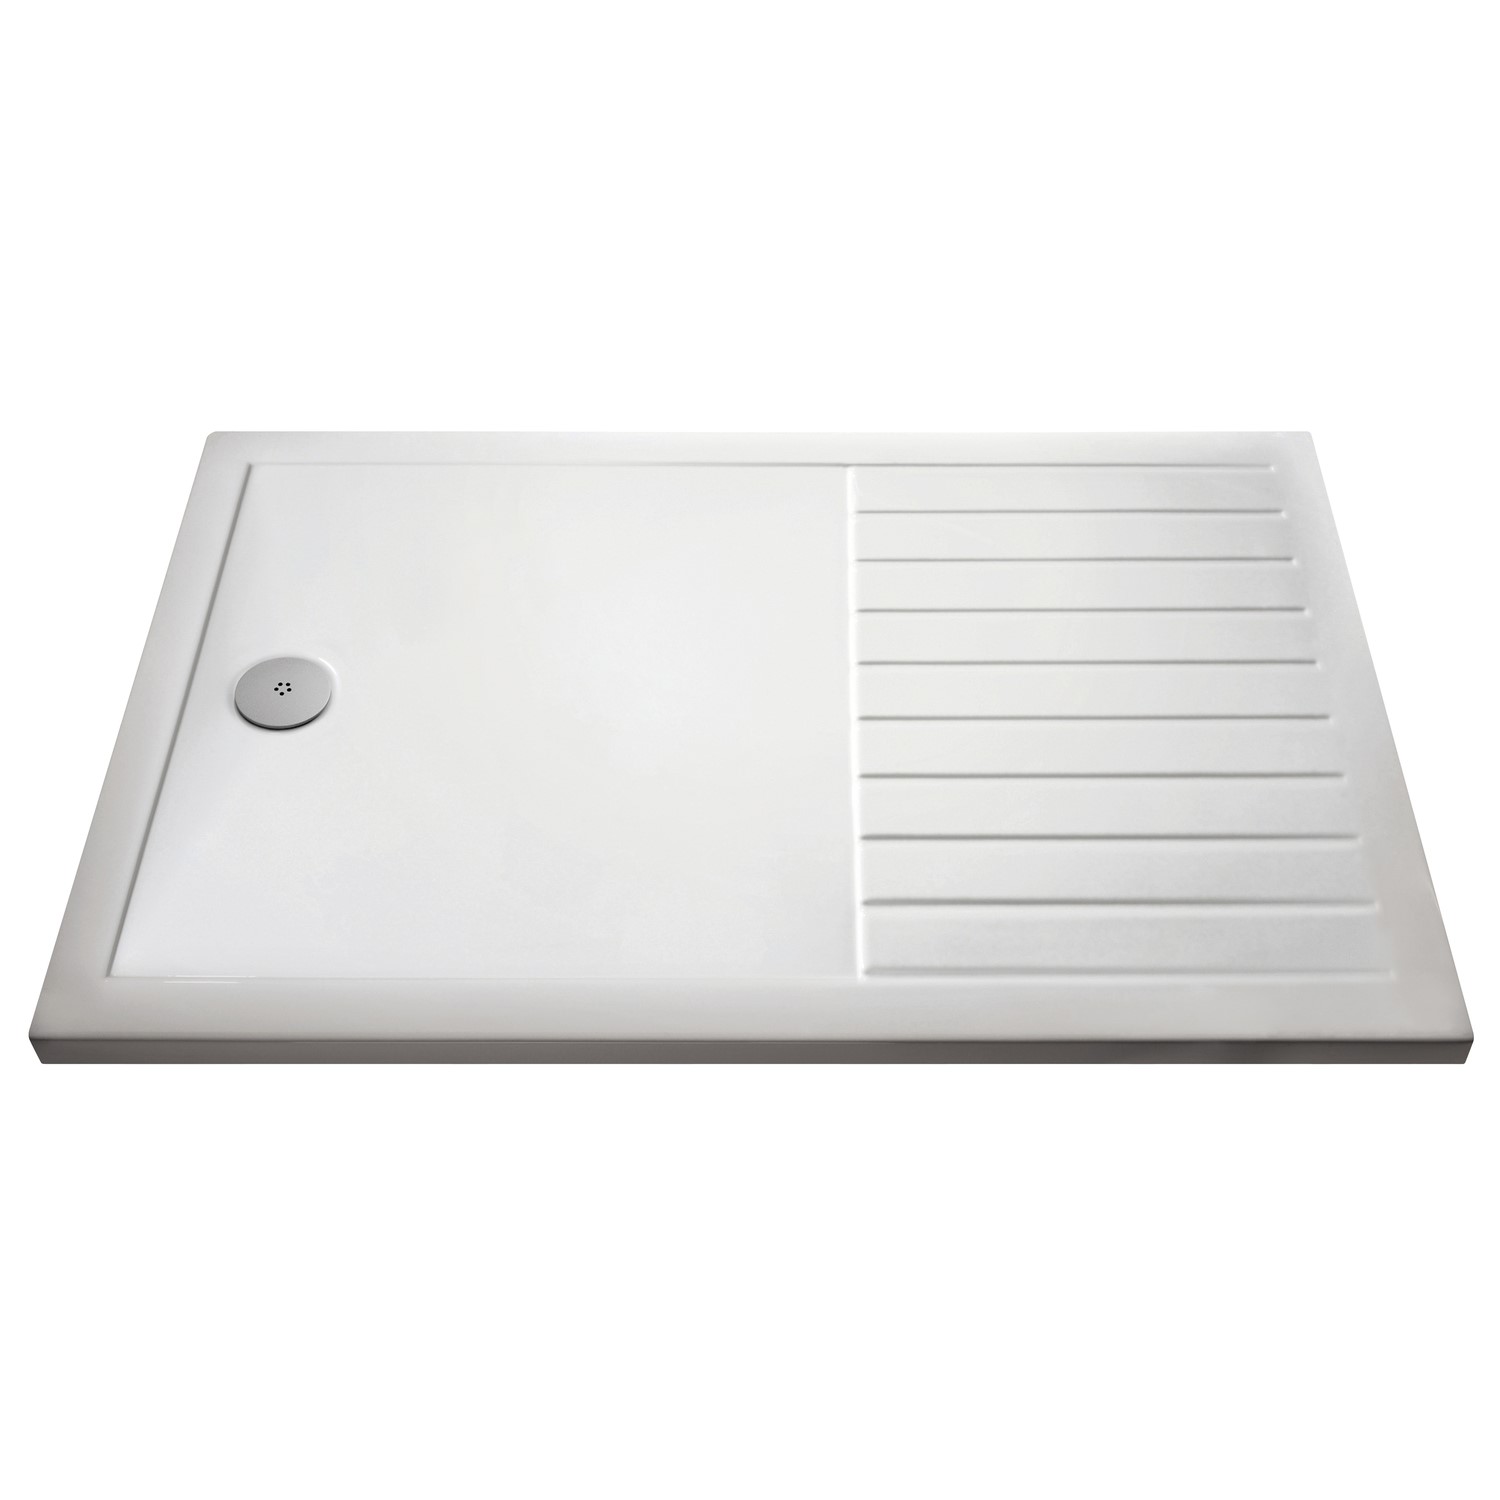 Low Profile Rectangular Walk In Shower Tray with Drying Area 1400 x 900mm - Purity